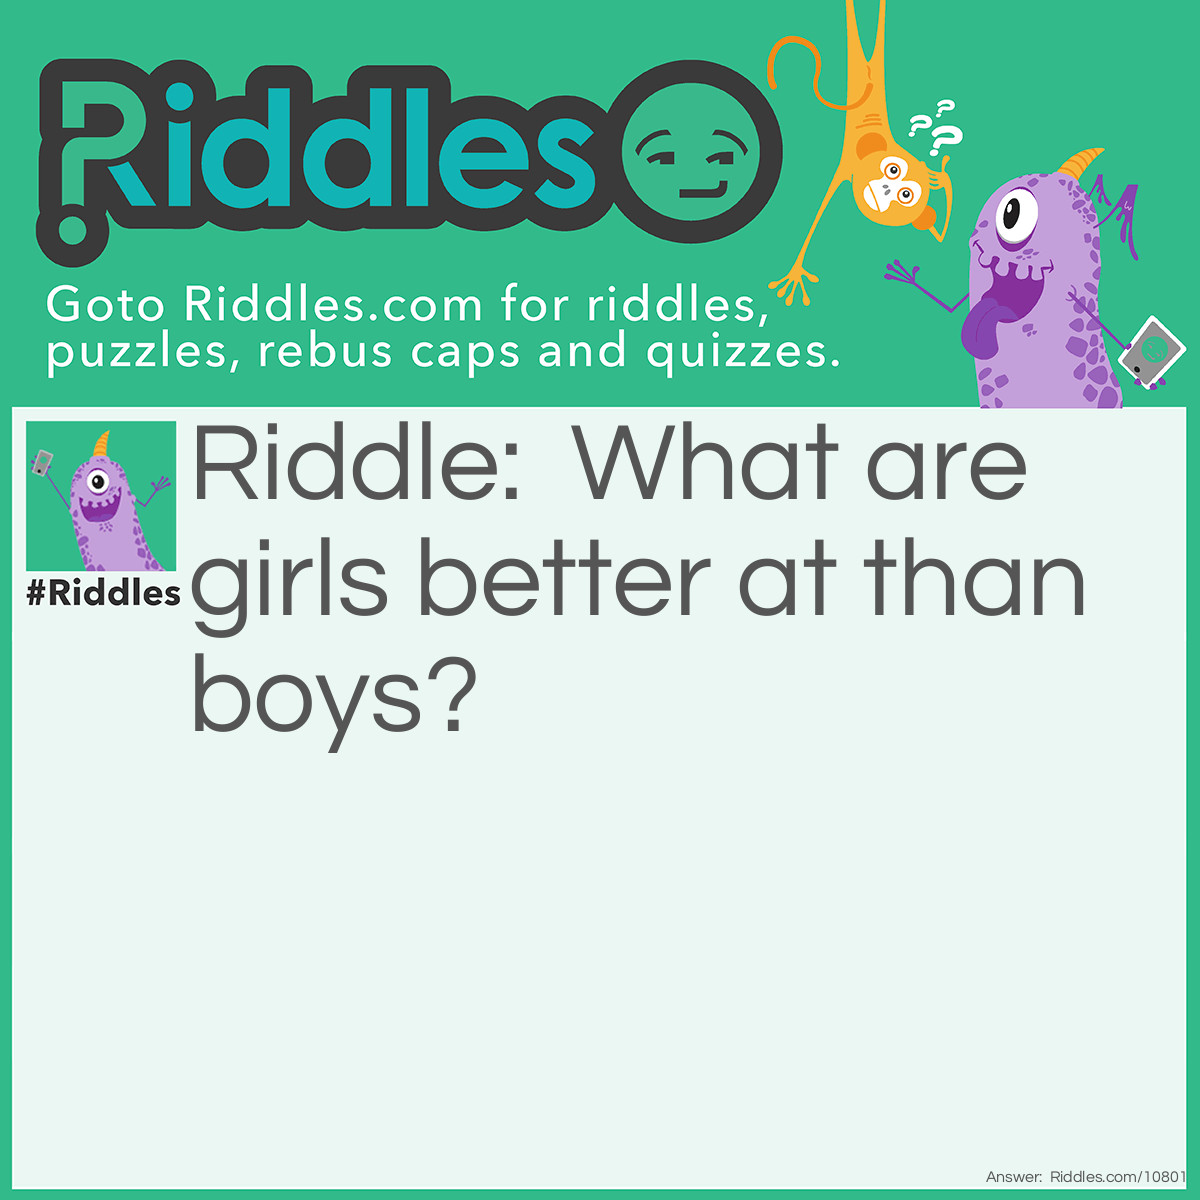 Riddle: What are girls better at than boys? Answer: Asking each other out.